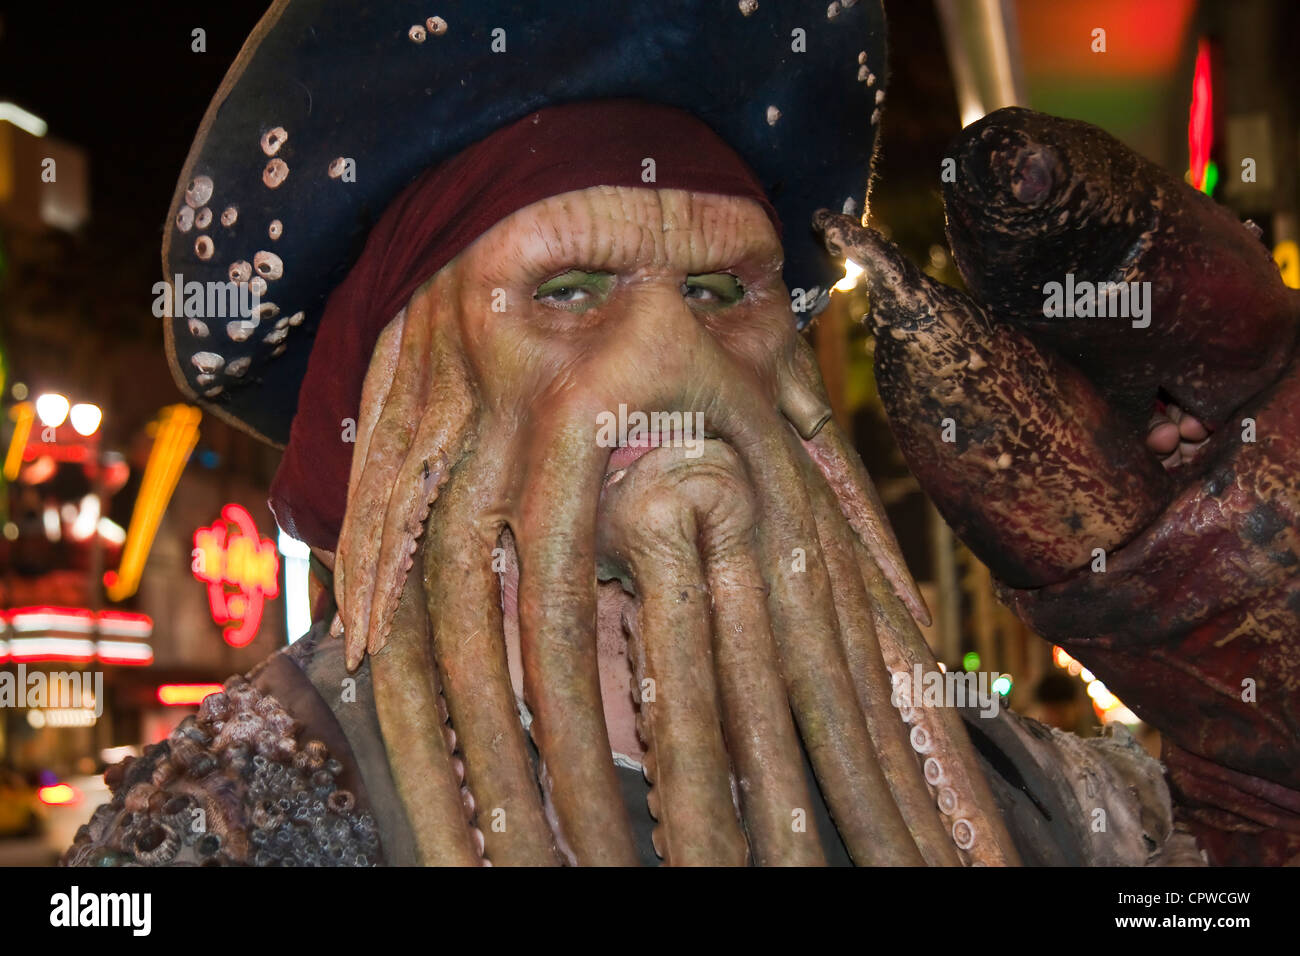 Davey Jones movie character impersonator from Pirates of the Caribbean Stock Photo